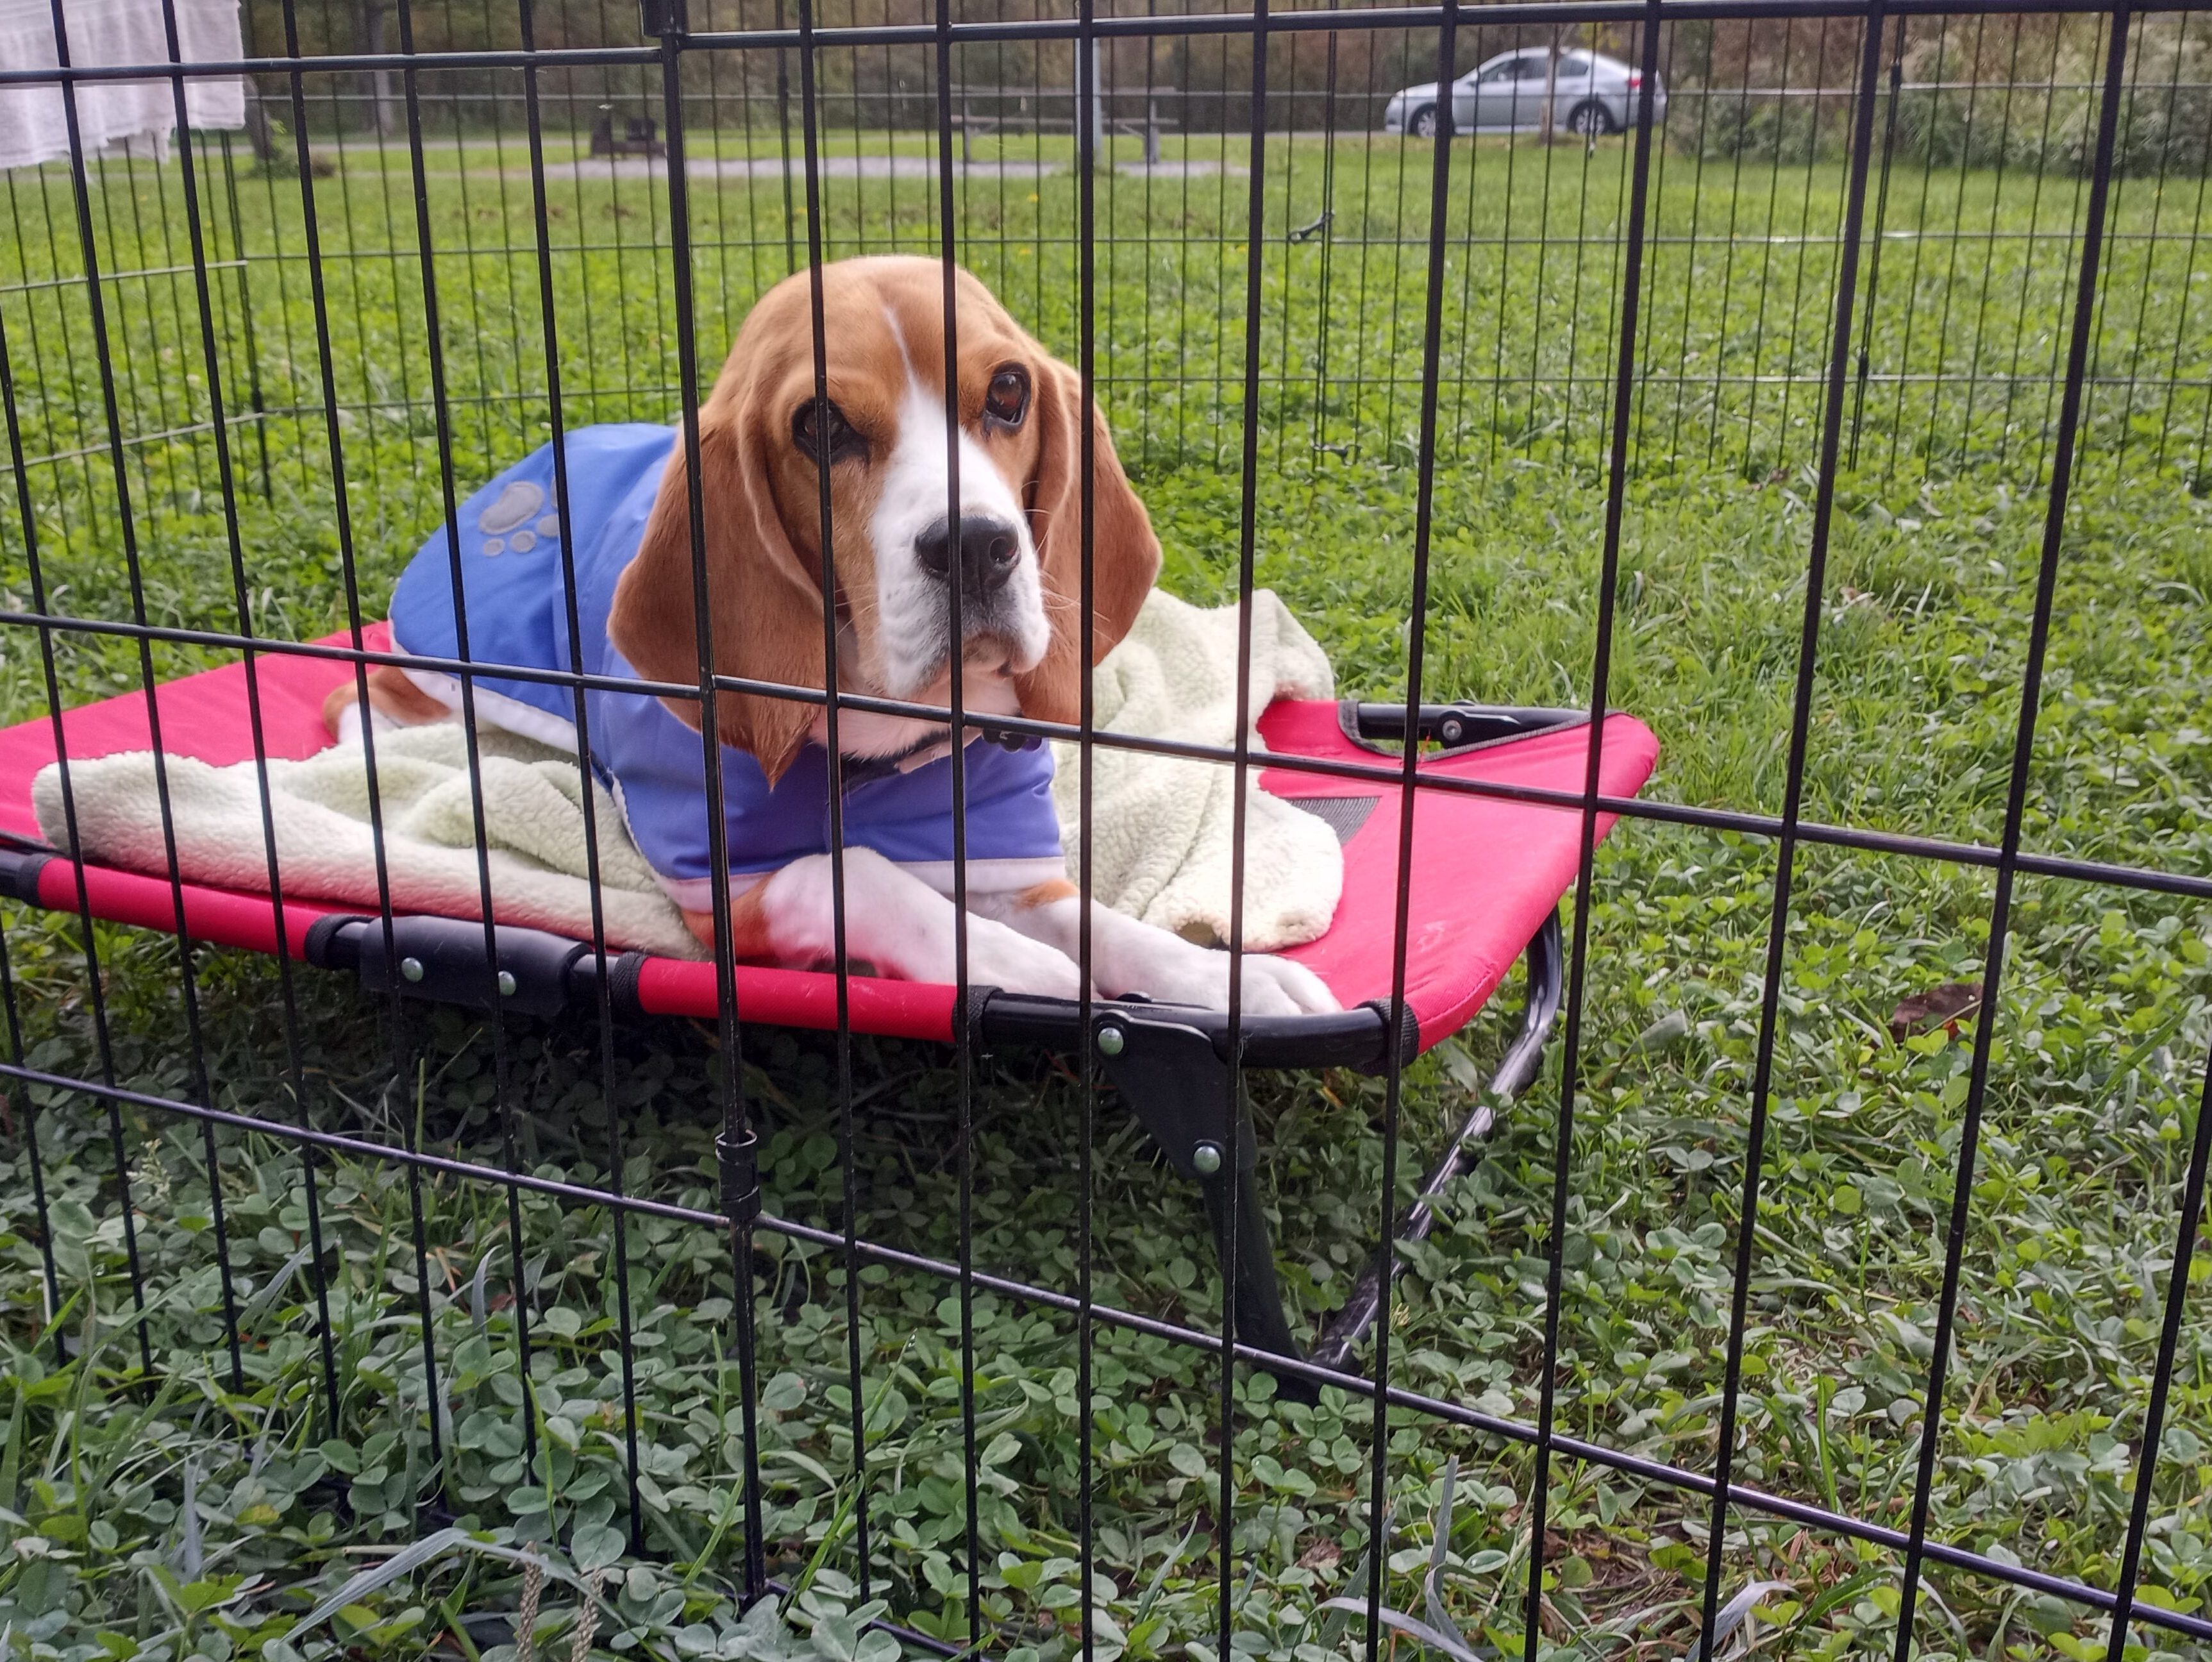 Dog laying on a raised bed